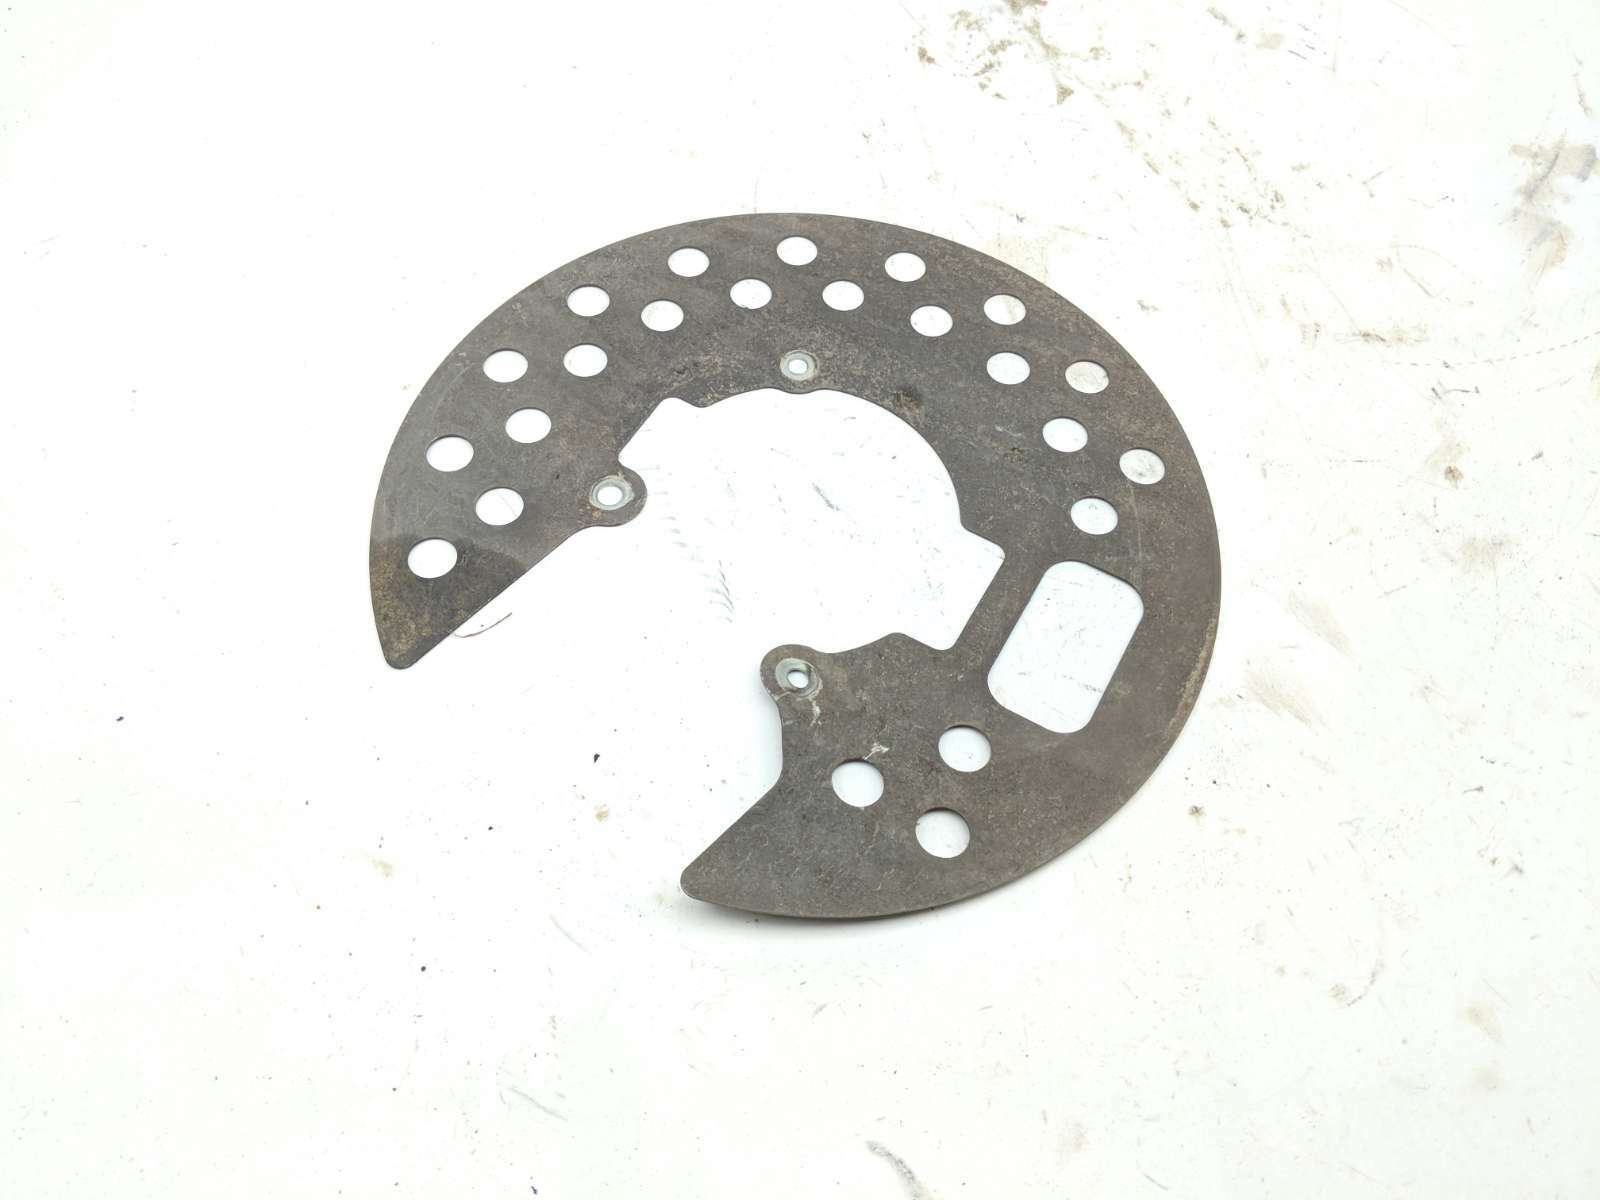 01 Yamaha Grizzly 600 Front Left Brake Rotor Dust Cover